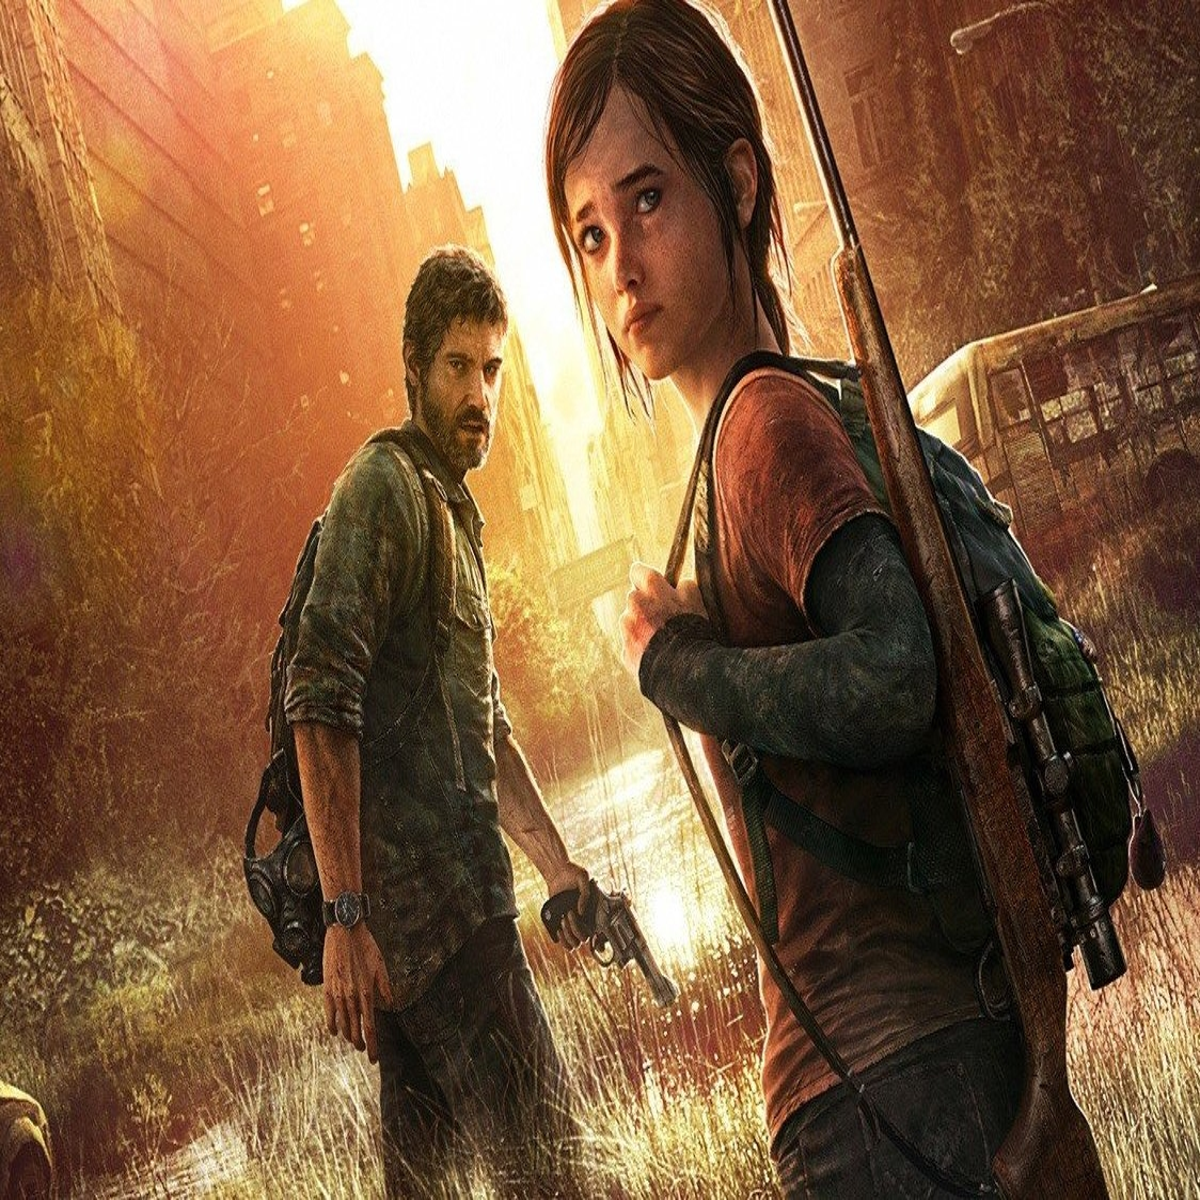 How it feels to play The Last of Us Remastered in 1080p/60fps